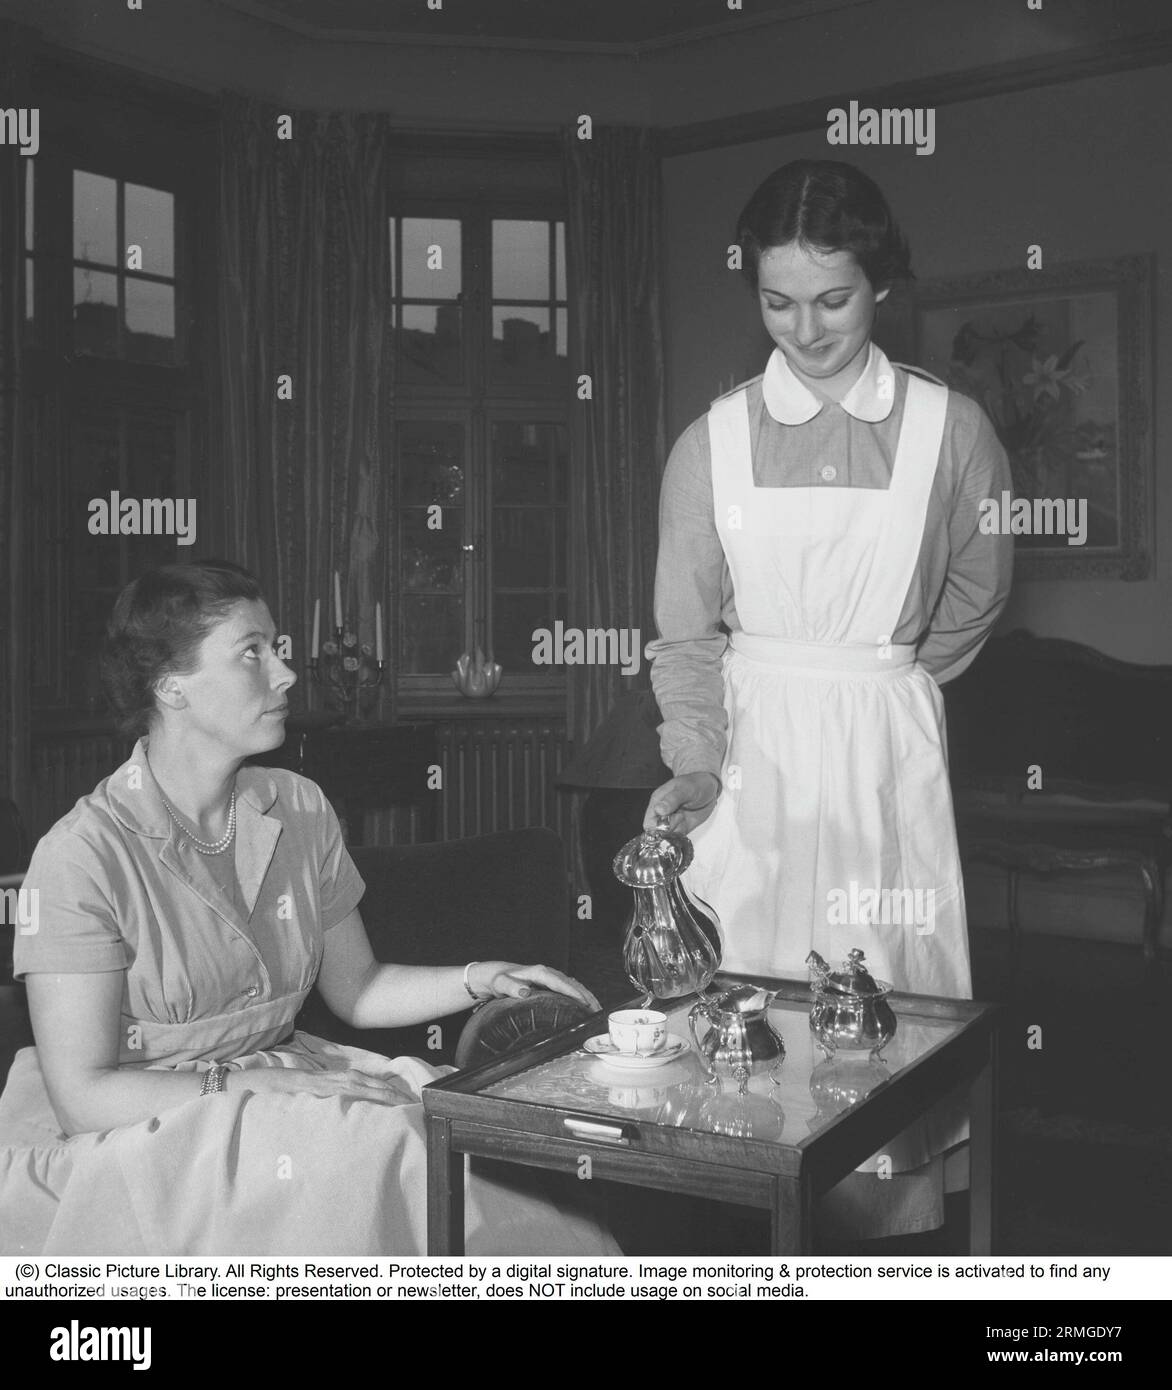 Living in the 1950s. A young woman working as a maid is serving tea or coffee to a woman sitting in the couch. She is neatly dressed in a white apron.    Sweden 1955. Kristoffersson ref BU6-8 Stock Photo